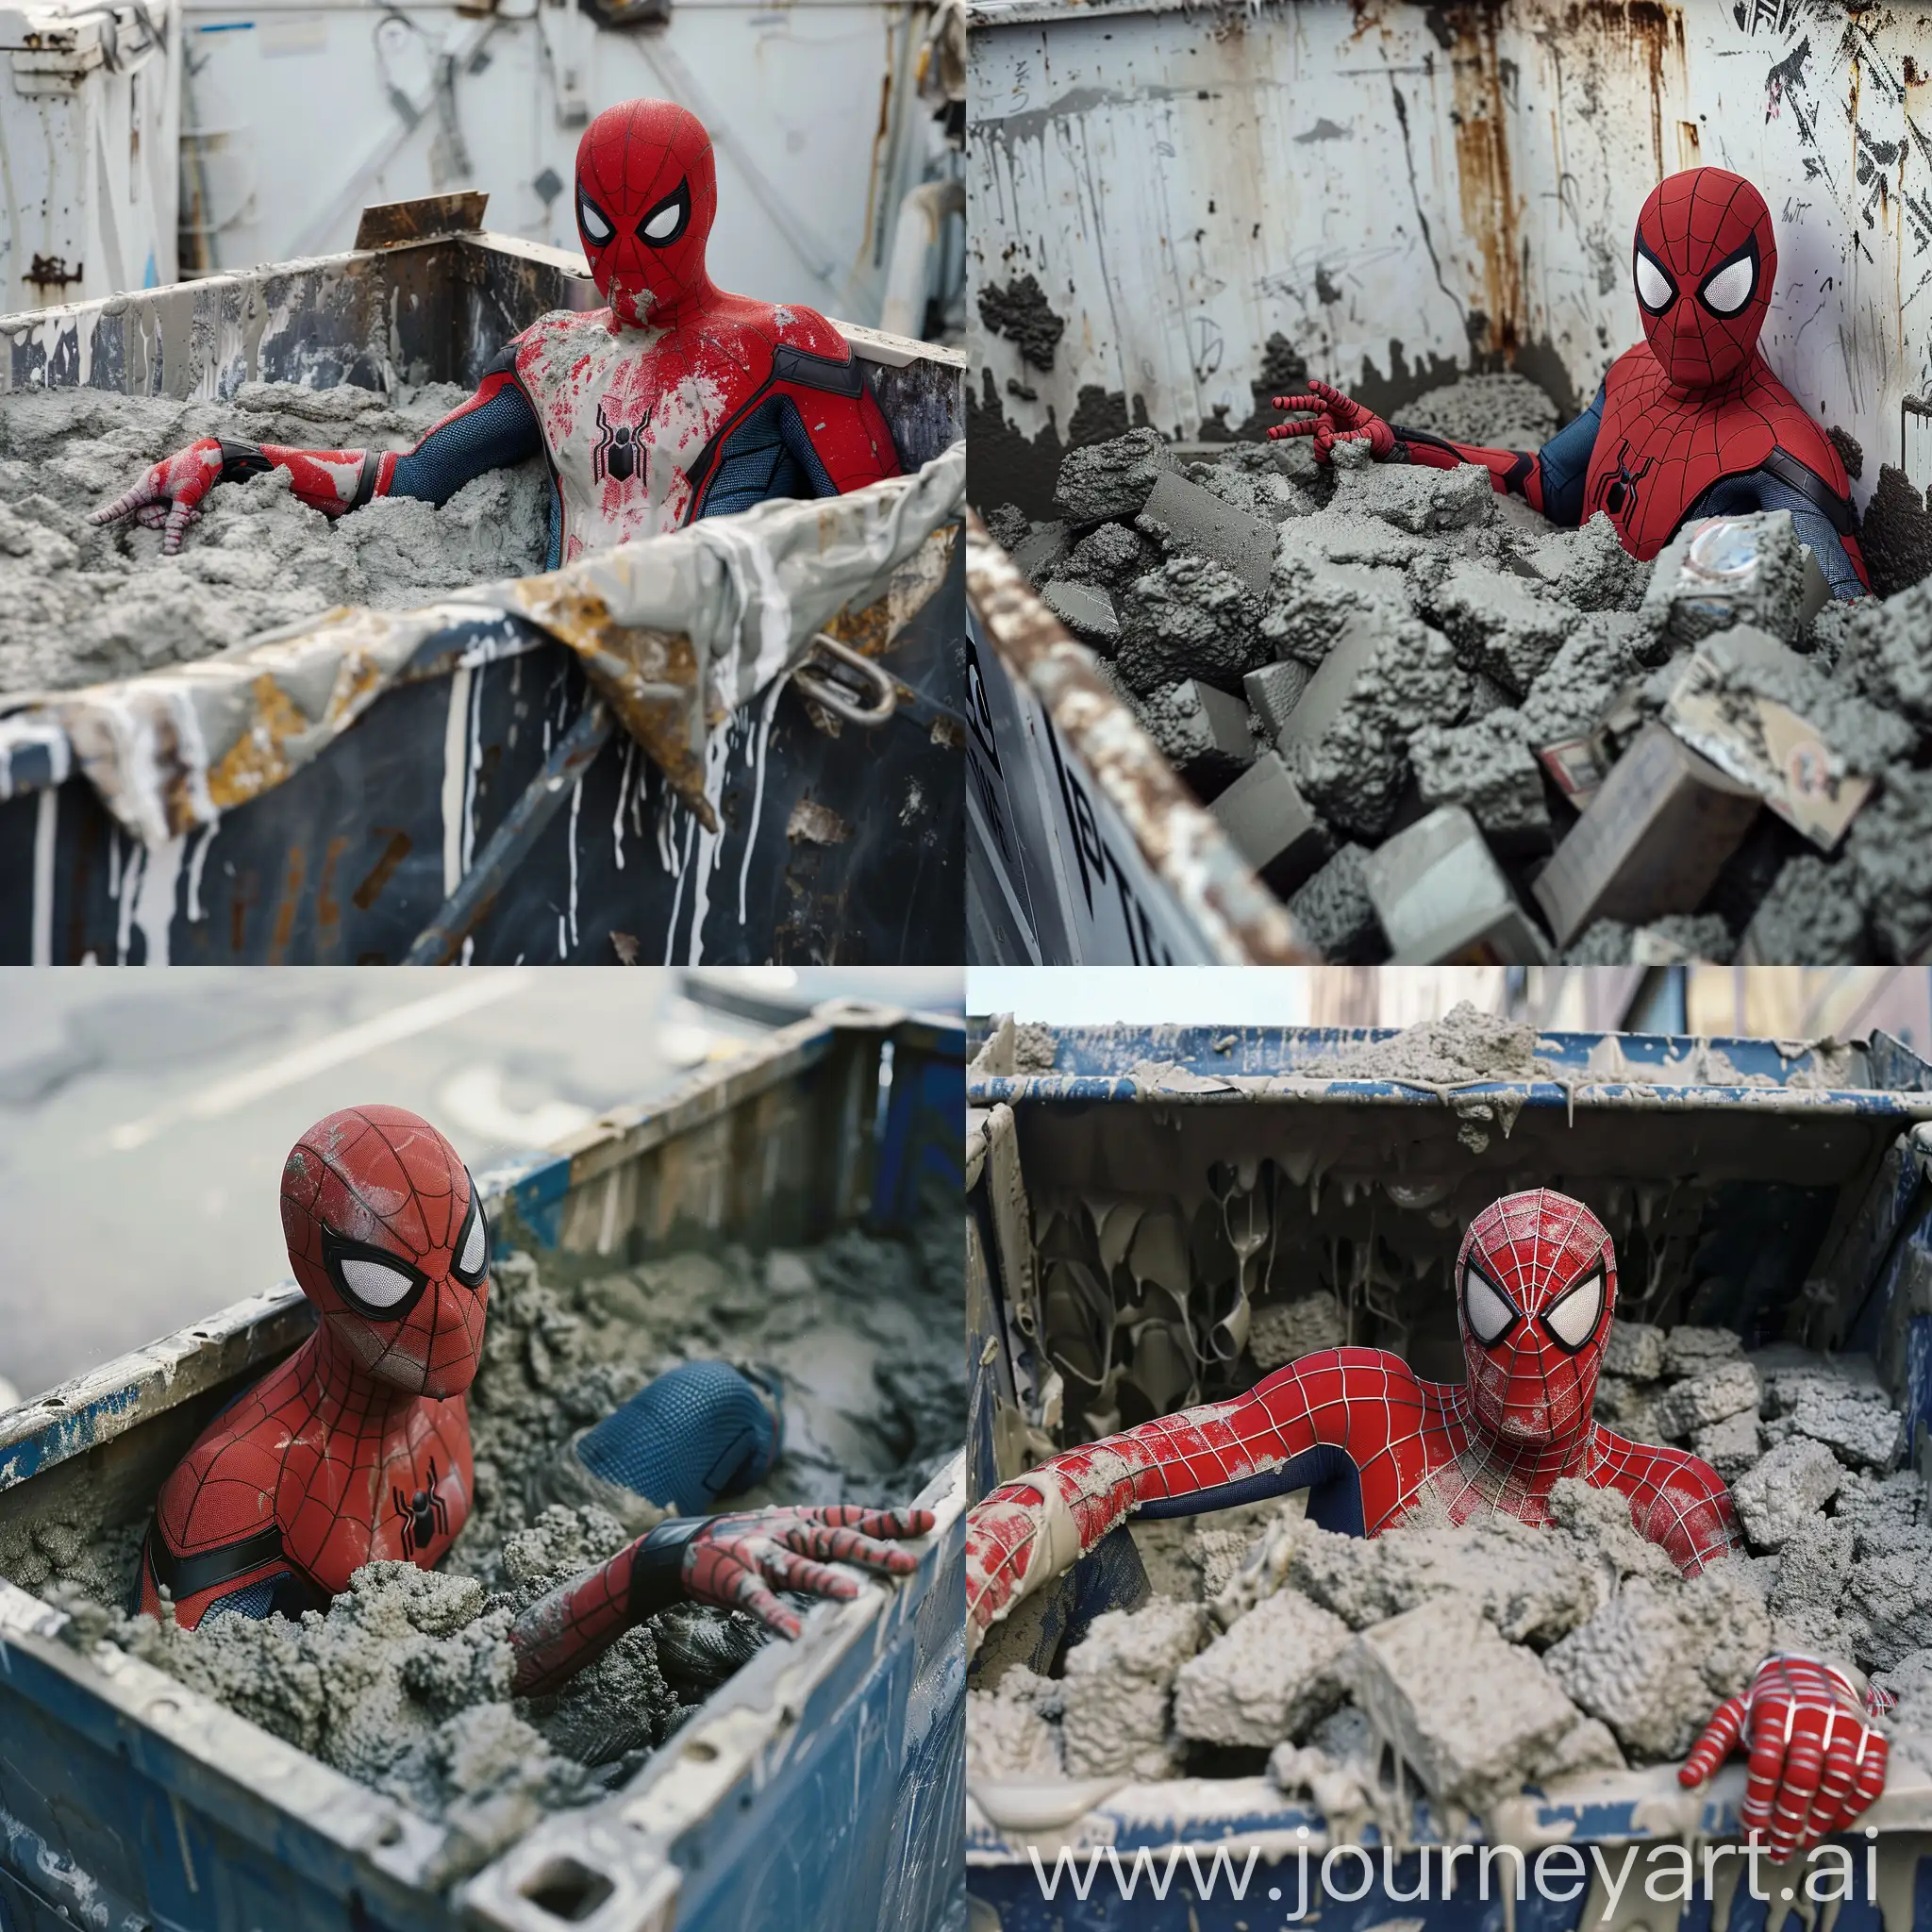 Spiderman-Embraced-by-Wet-Cement-Urban-Adventure-in-11-Aspect-Ratio